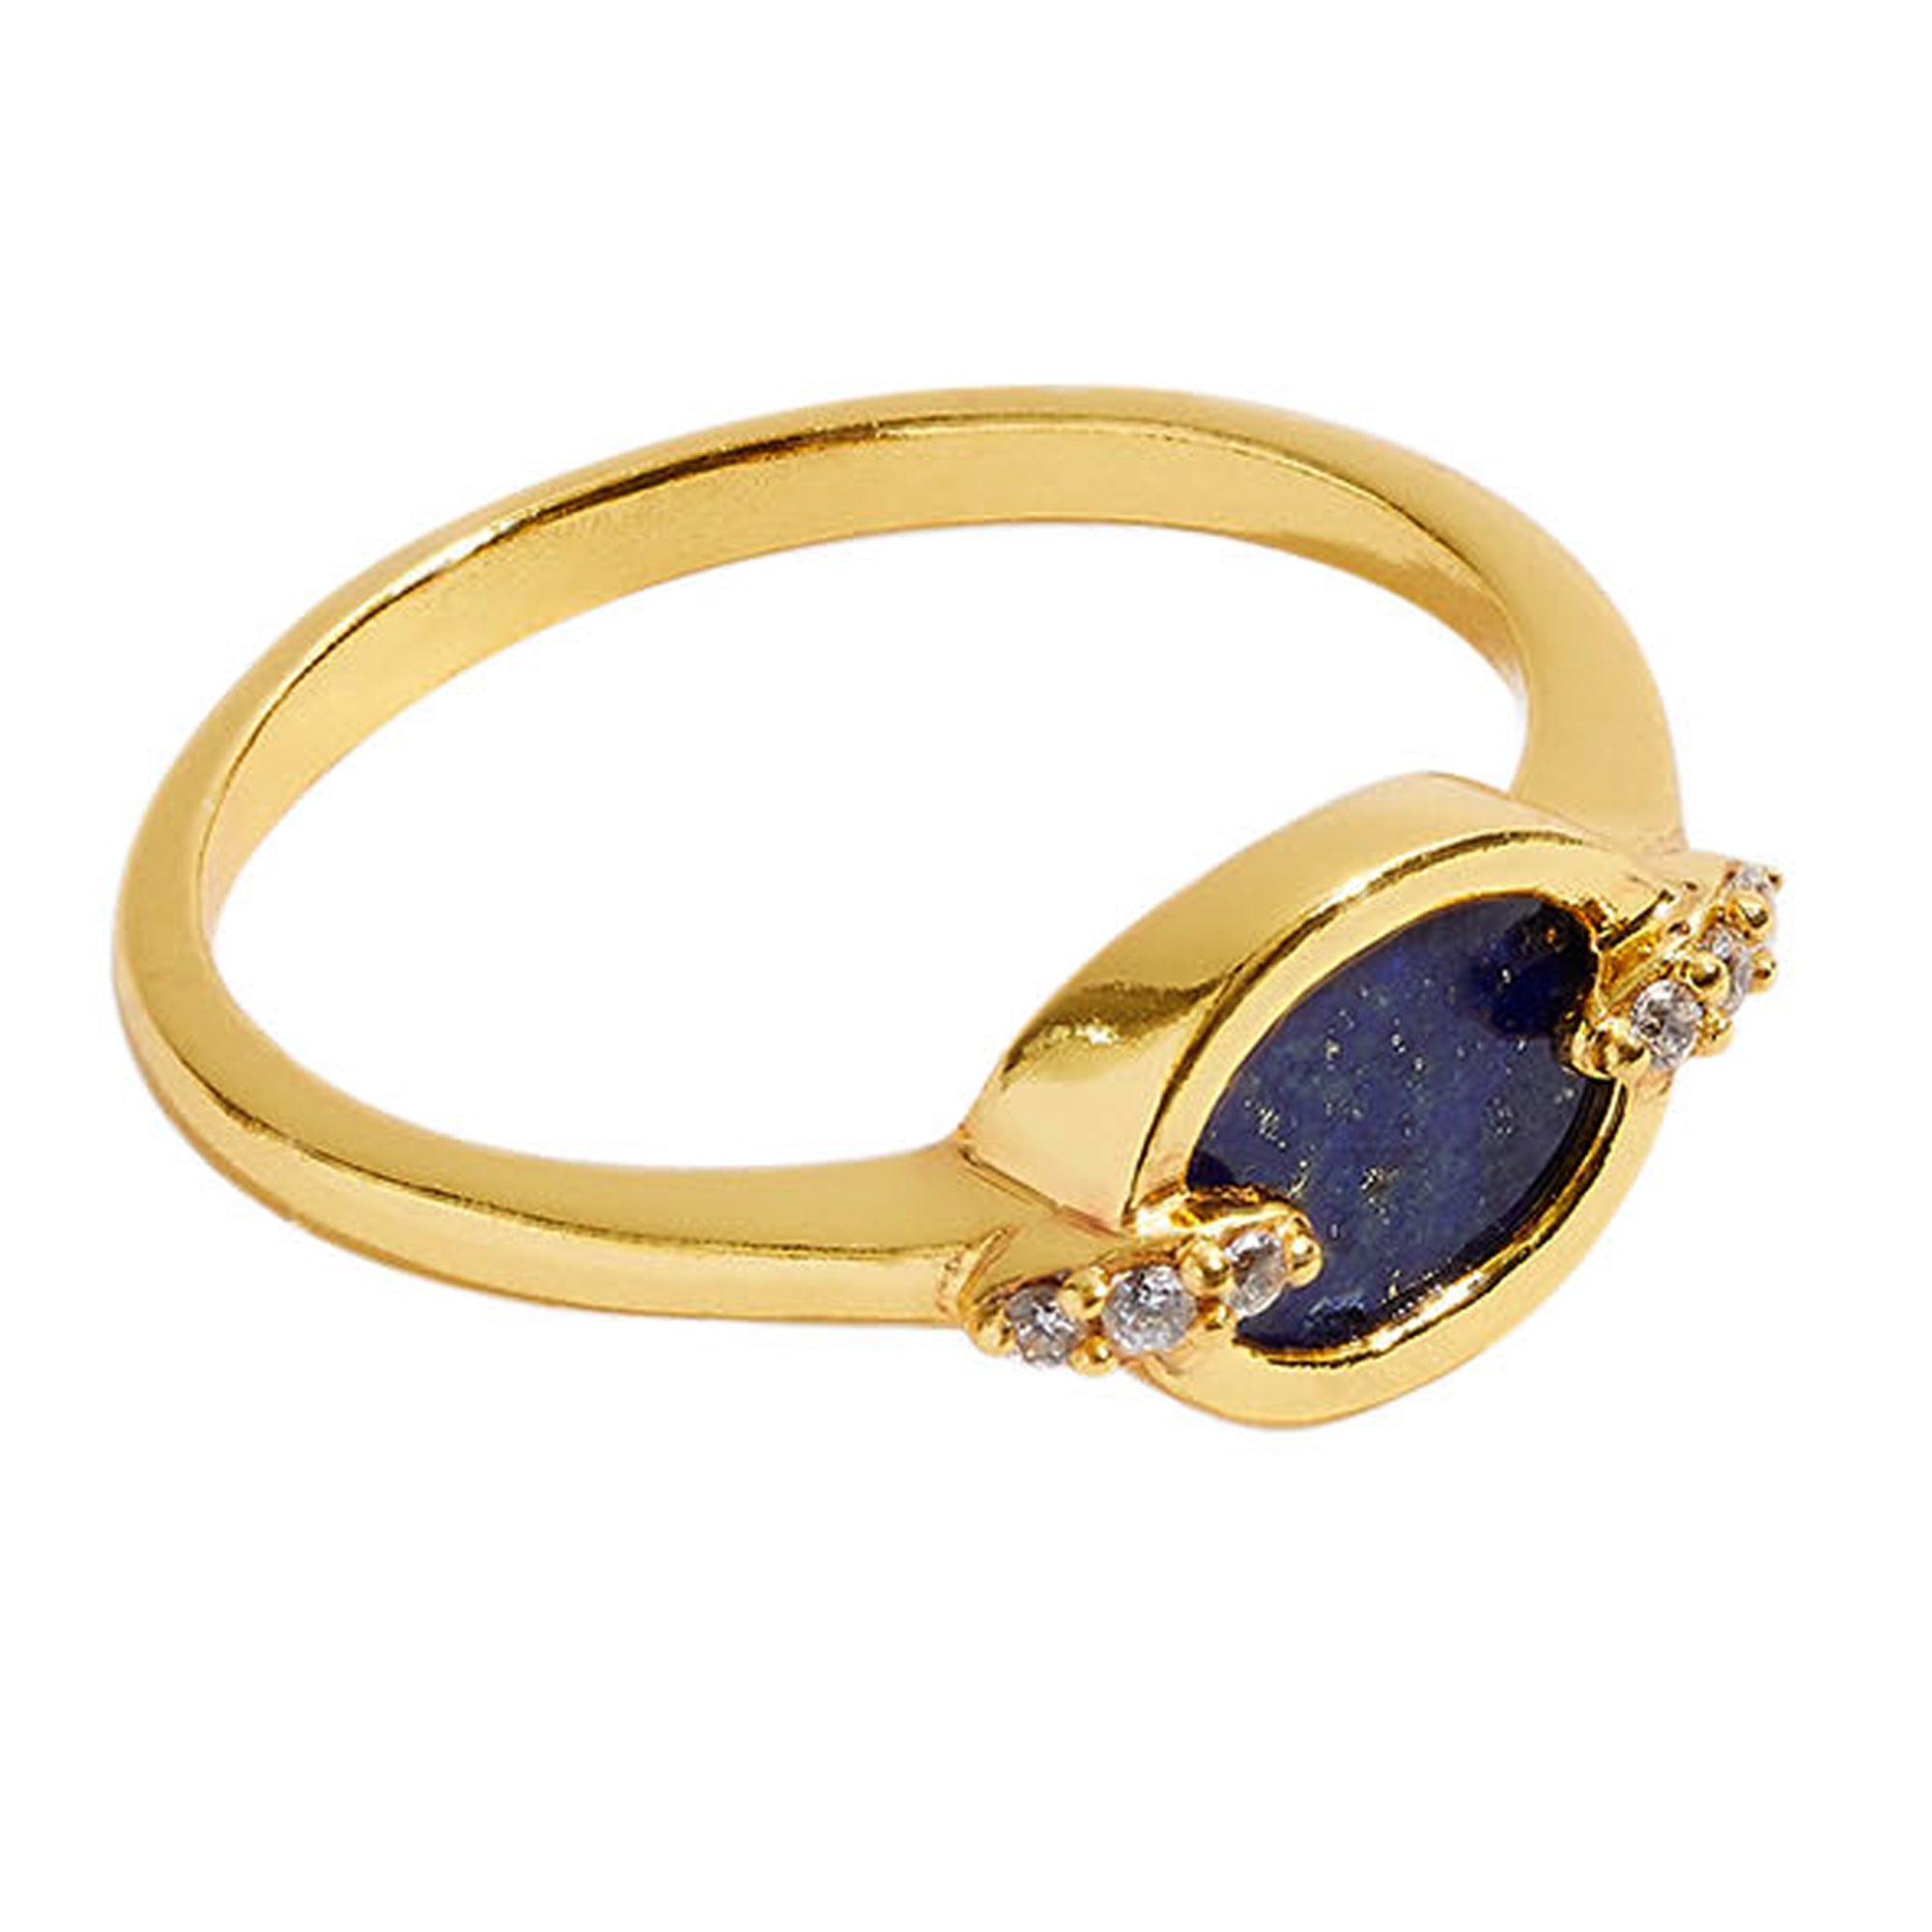 Real Gold Plated Z Healing Stone Lapis Ring For Women By Accessorize London-Medium